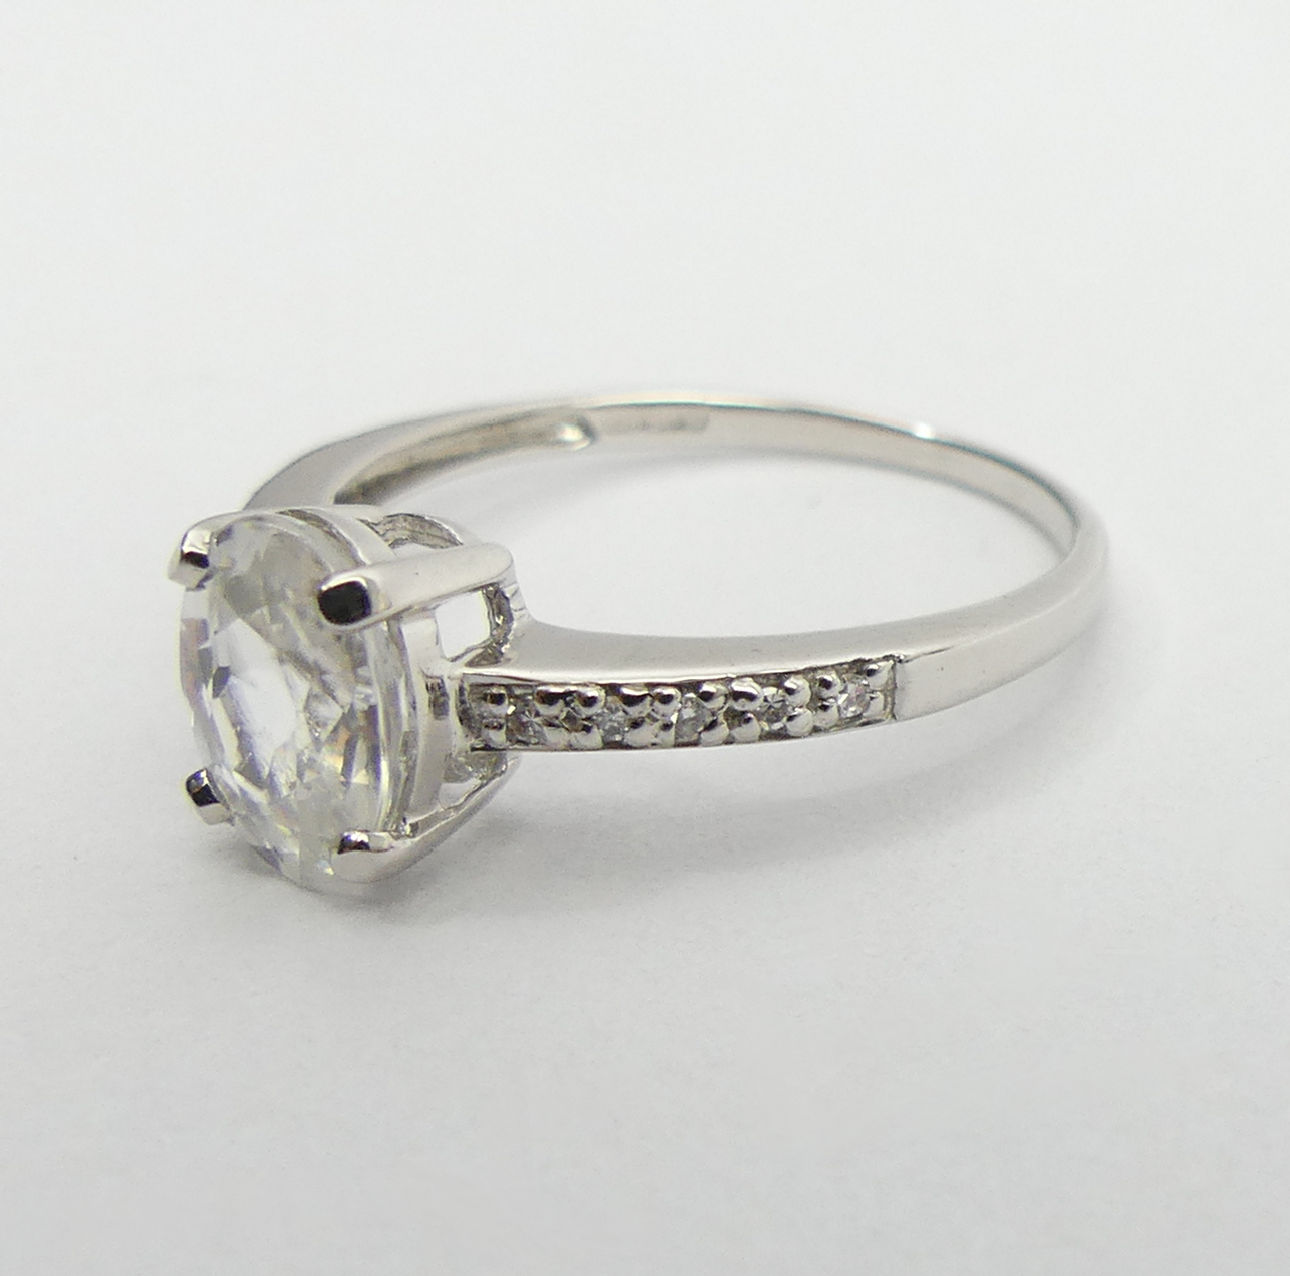 9ct white gold topaz and diamond ring, 1.9 grams, 8mm, size N1/2. UK Postage £12. - Image 3 of 6